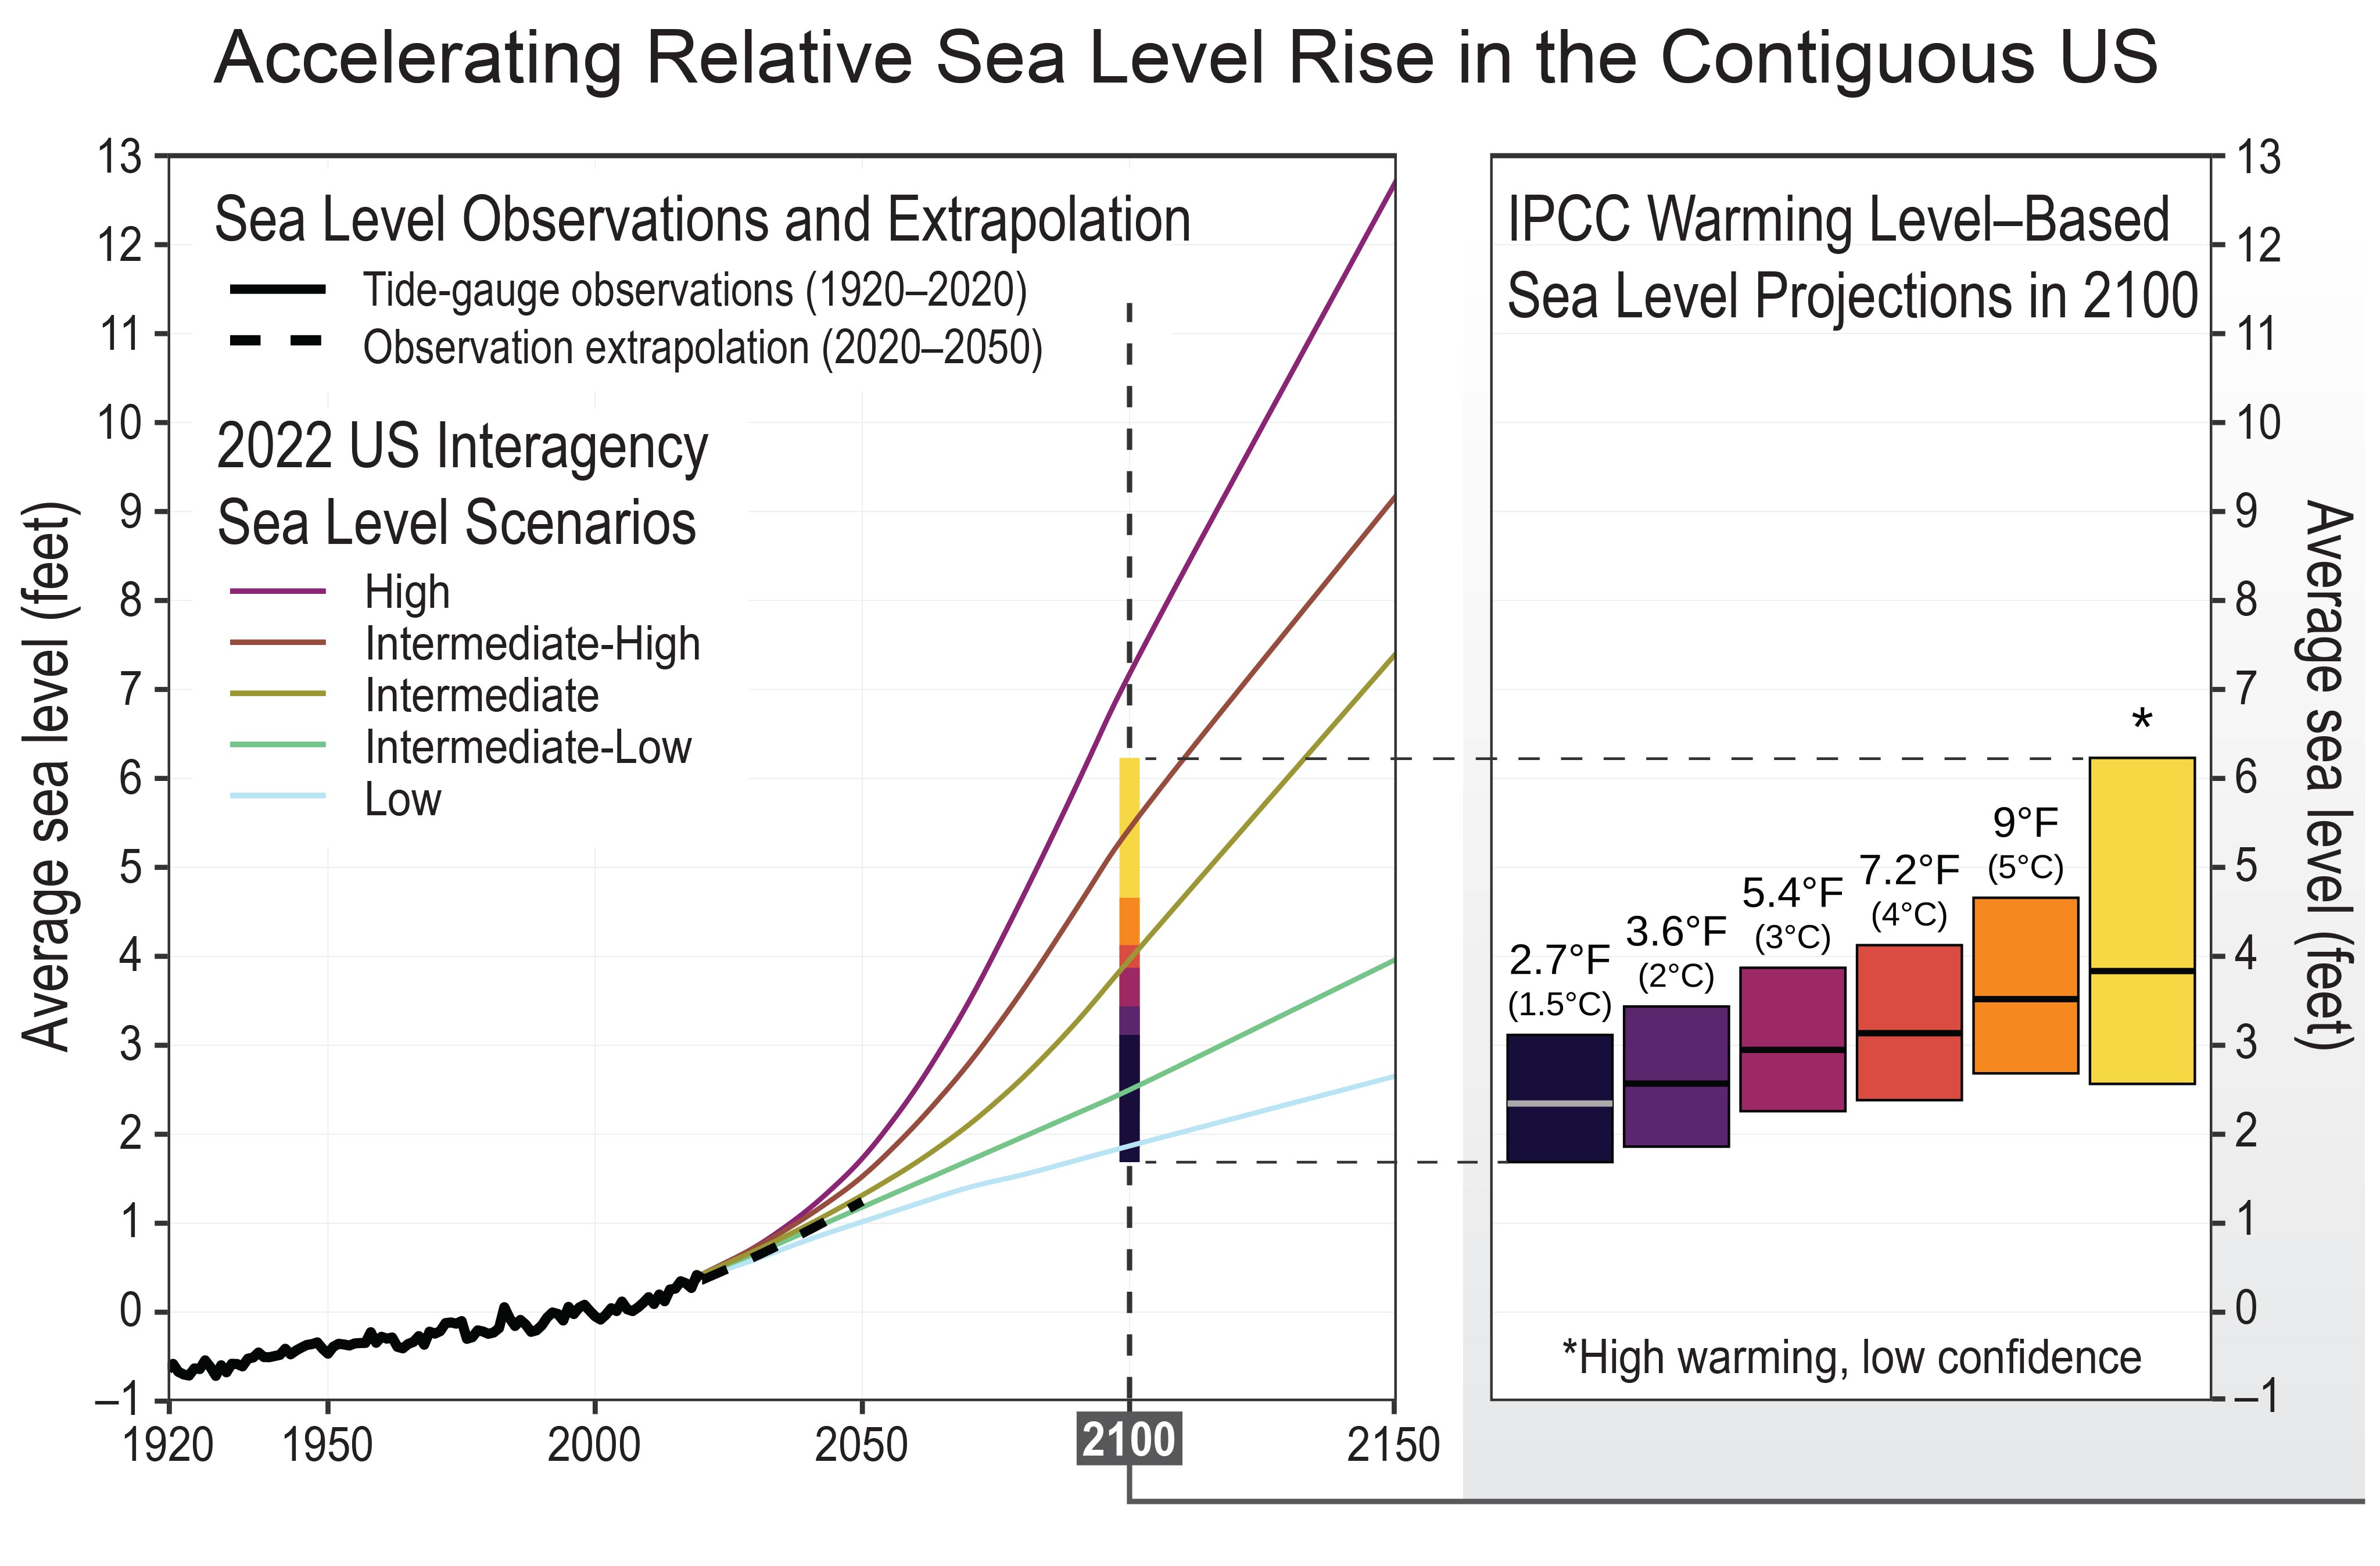 Accelerating Relative Sea Level Rise in the Contiguous US